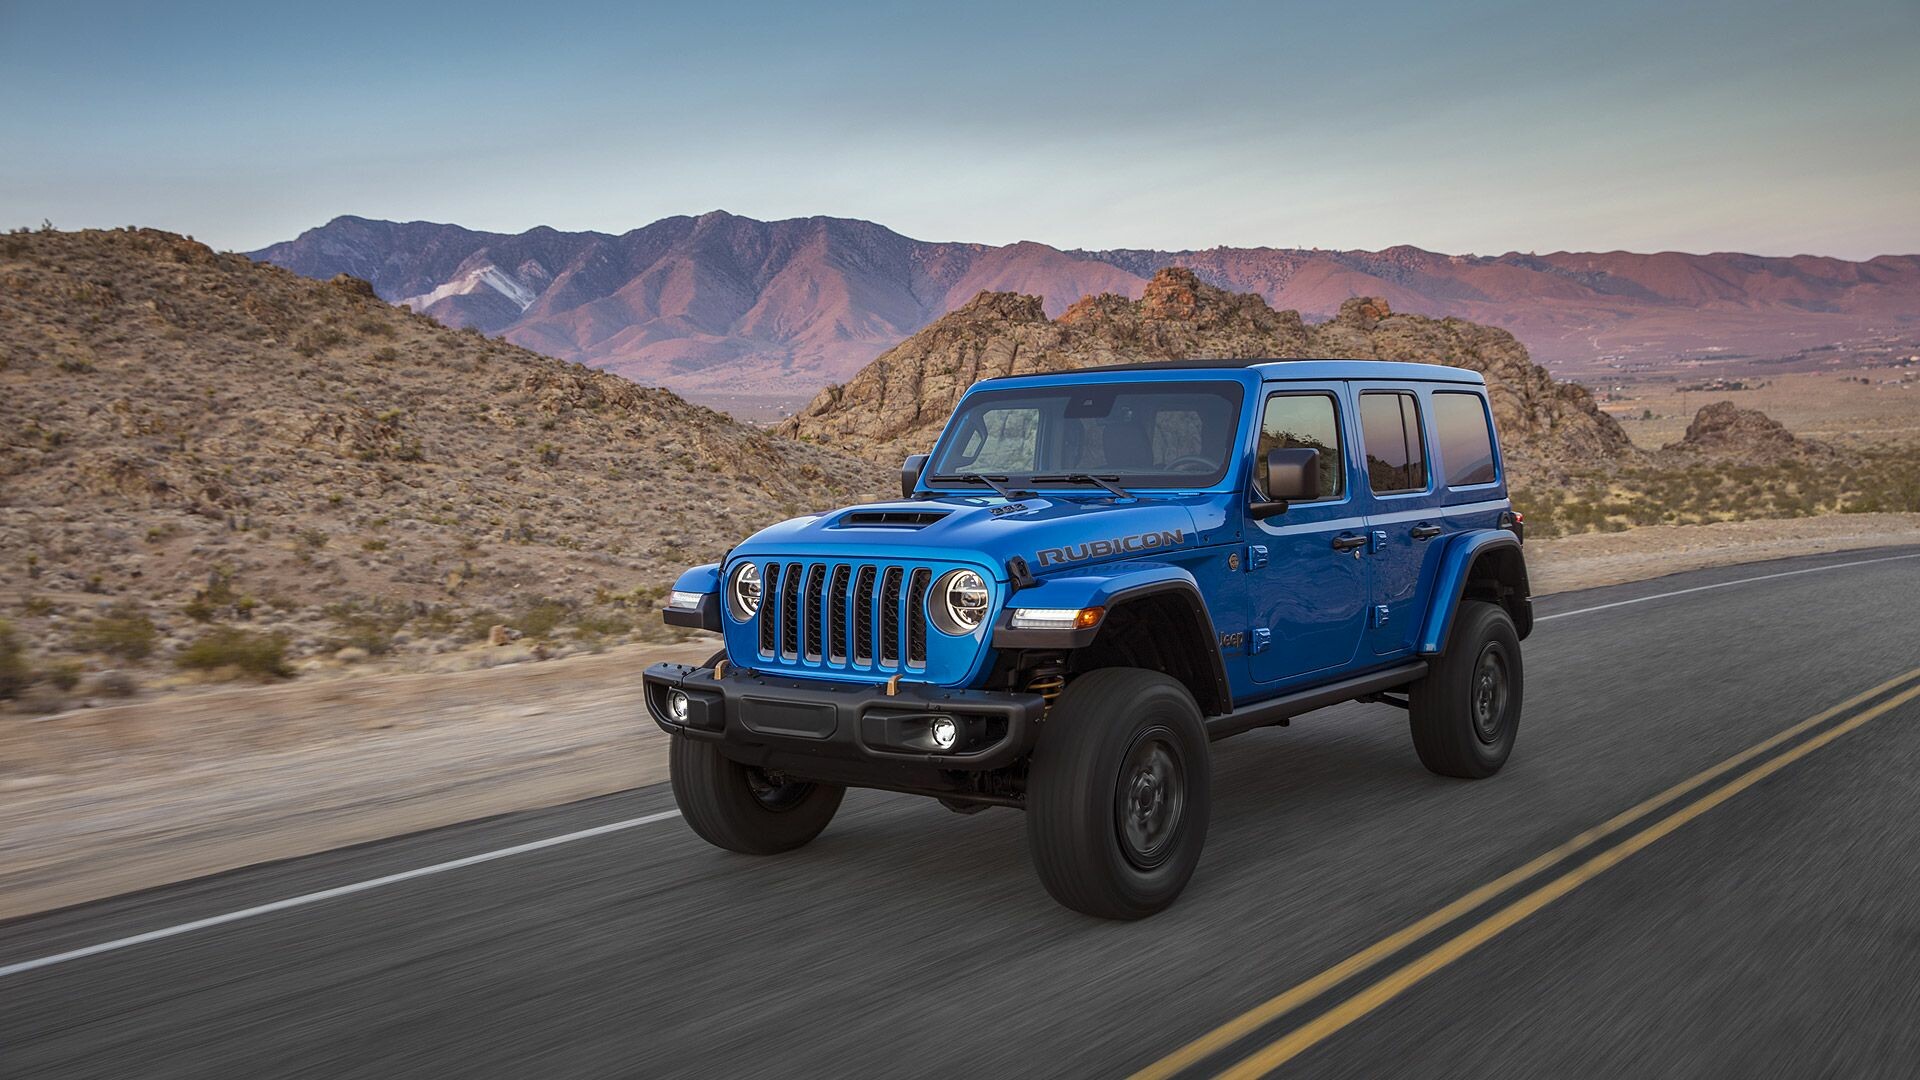 Jeep Wrangler: Rubicon, A long wheelbase "Unlimited" model was introduced in 2004. 1920x1080 Full HD Background.